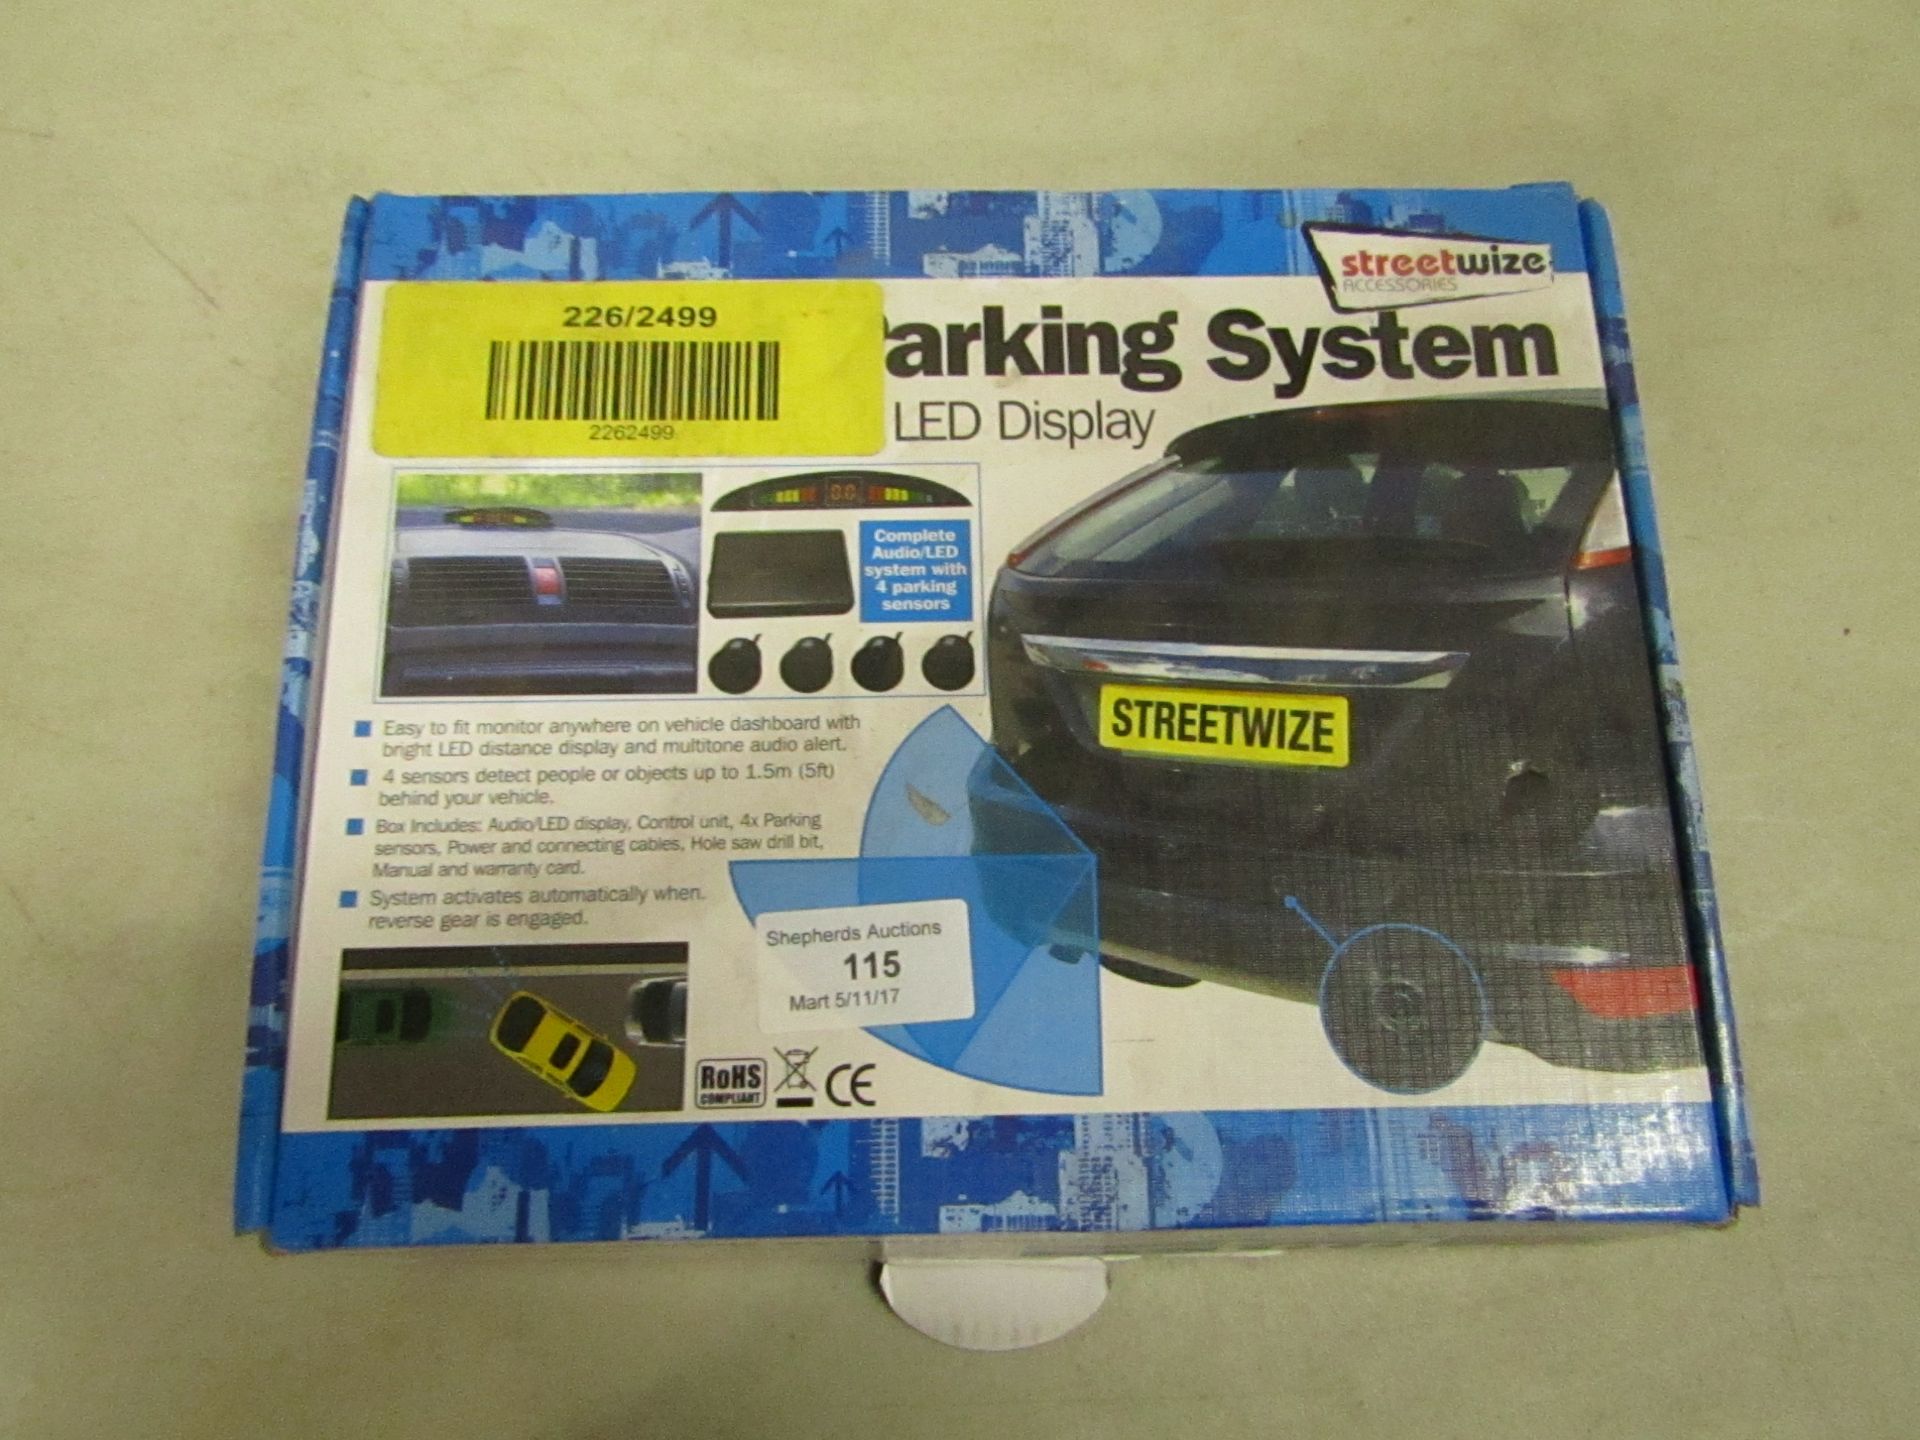 Streetwize Reverse Parking System with audio warning and LED Display, looks new in box